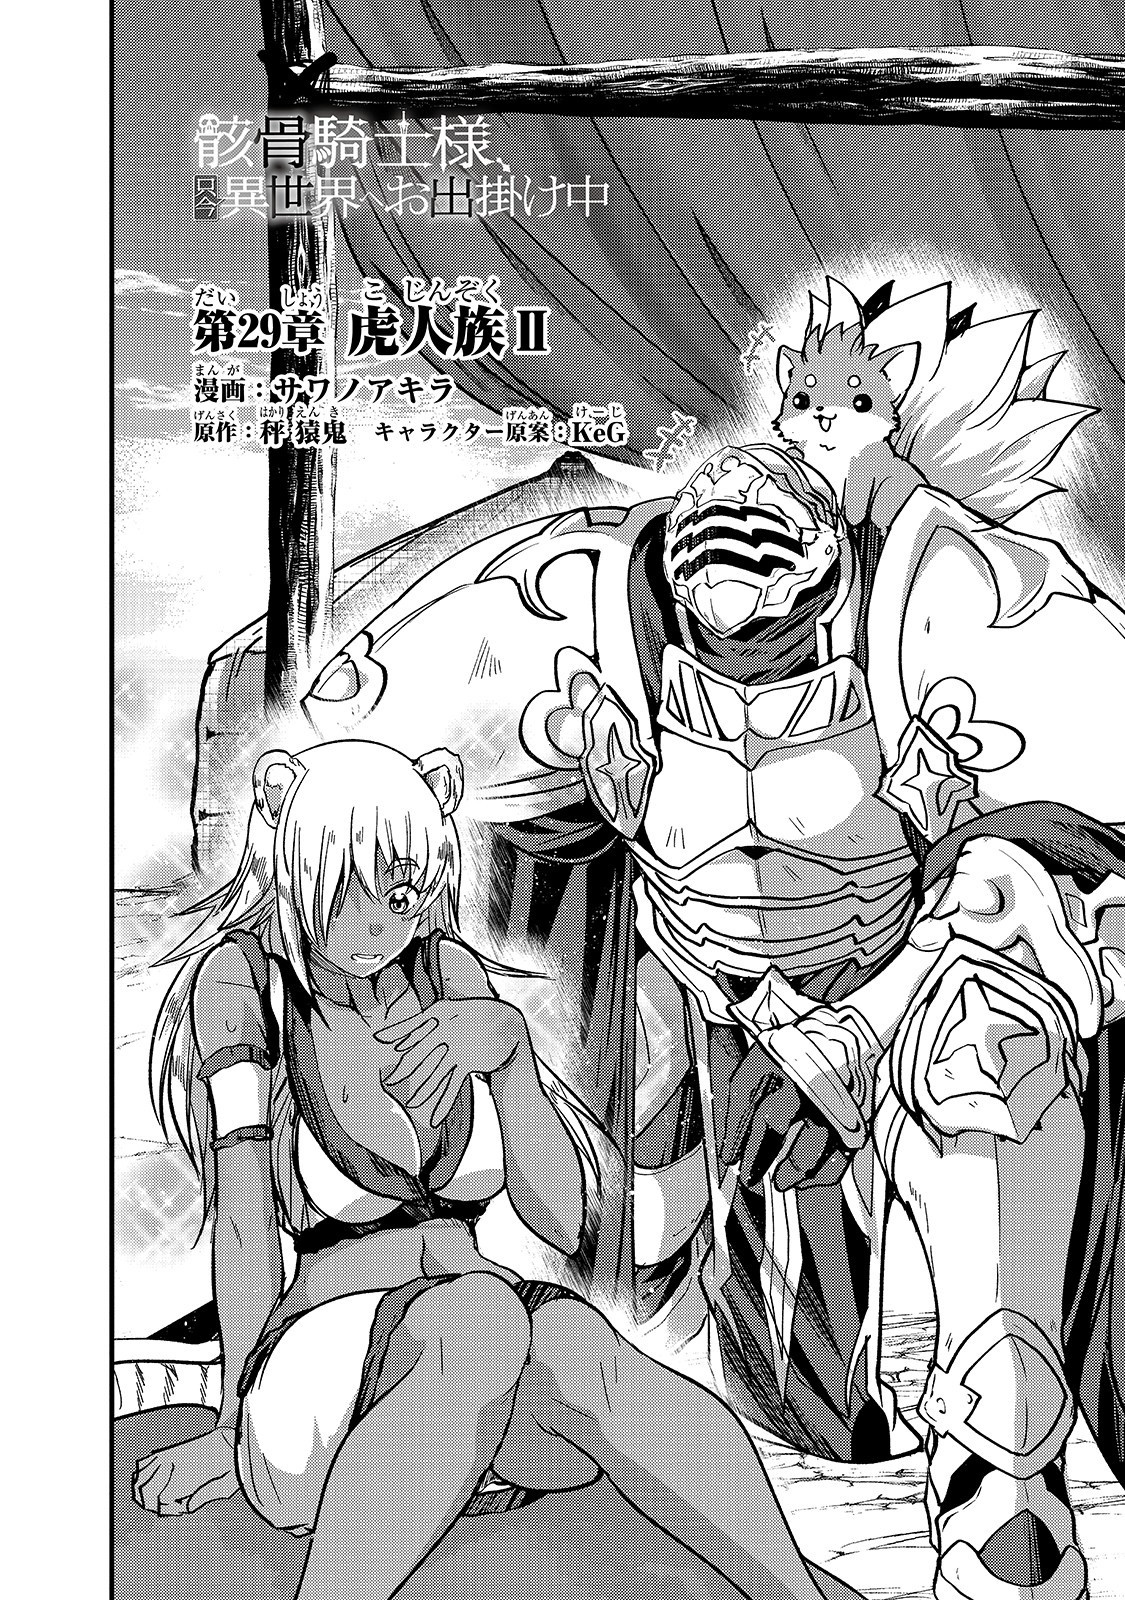 Skeleton Knight In Another World Manga Chapter 29 Skeleton Knight In Another World Wiki Fandom